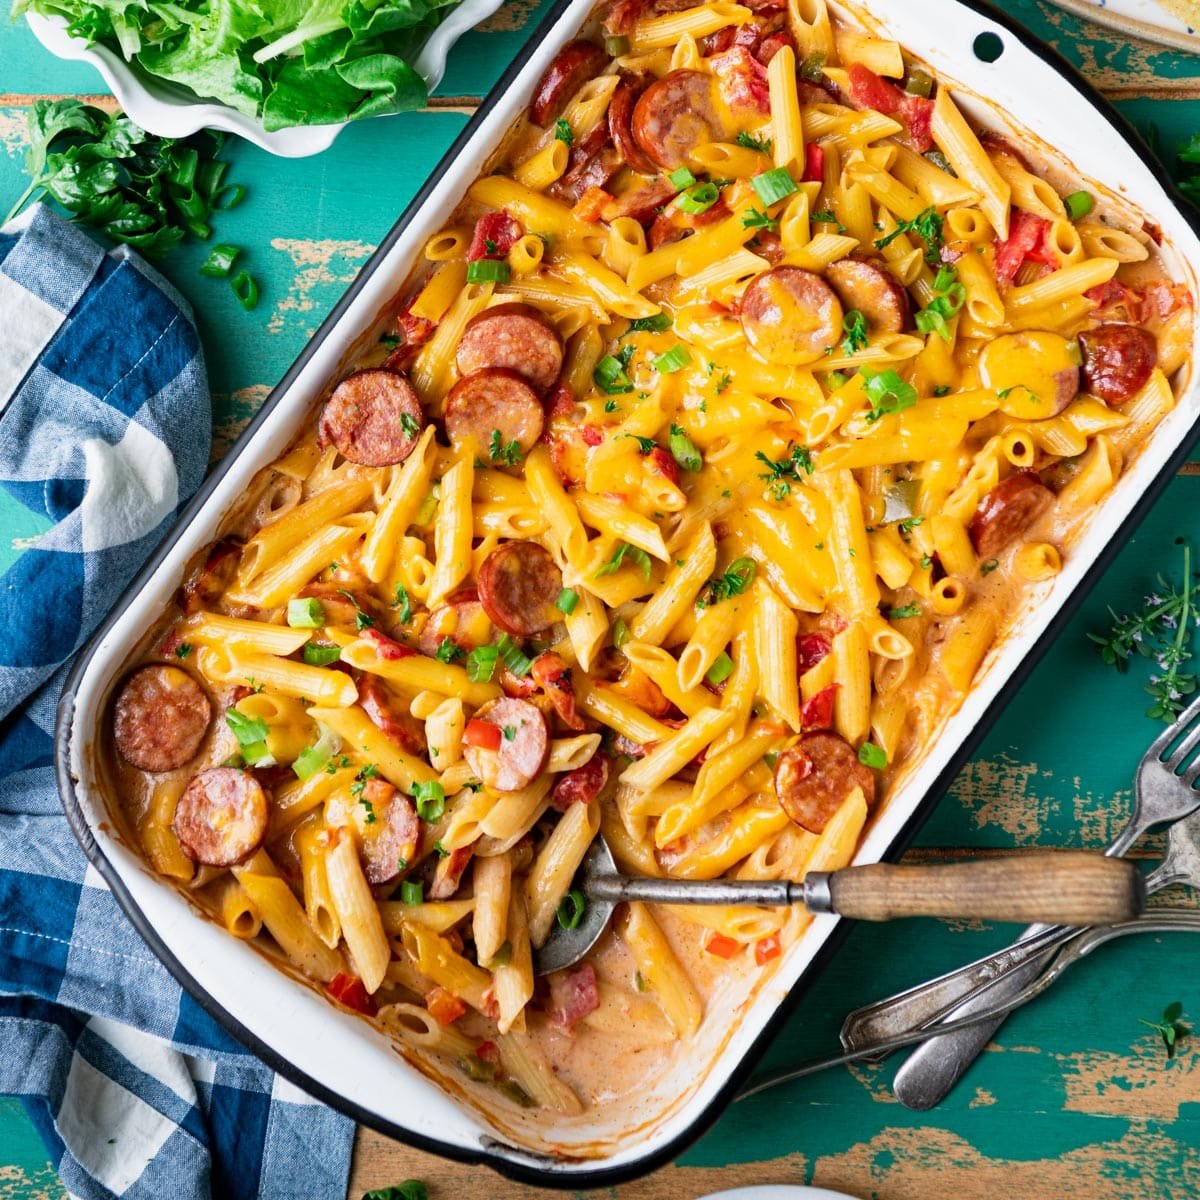 Square overhead image of a cajun sausage pasta casserole on a turquoise table.